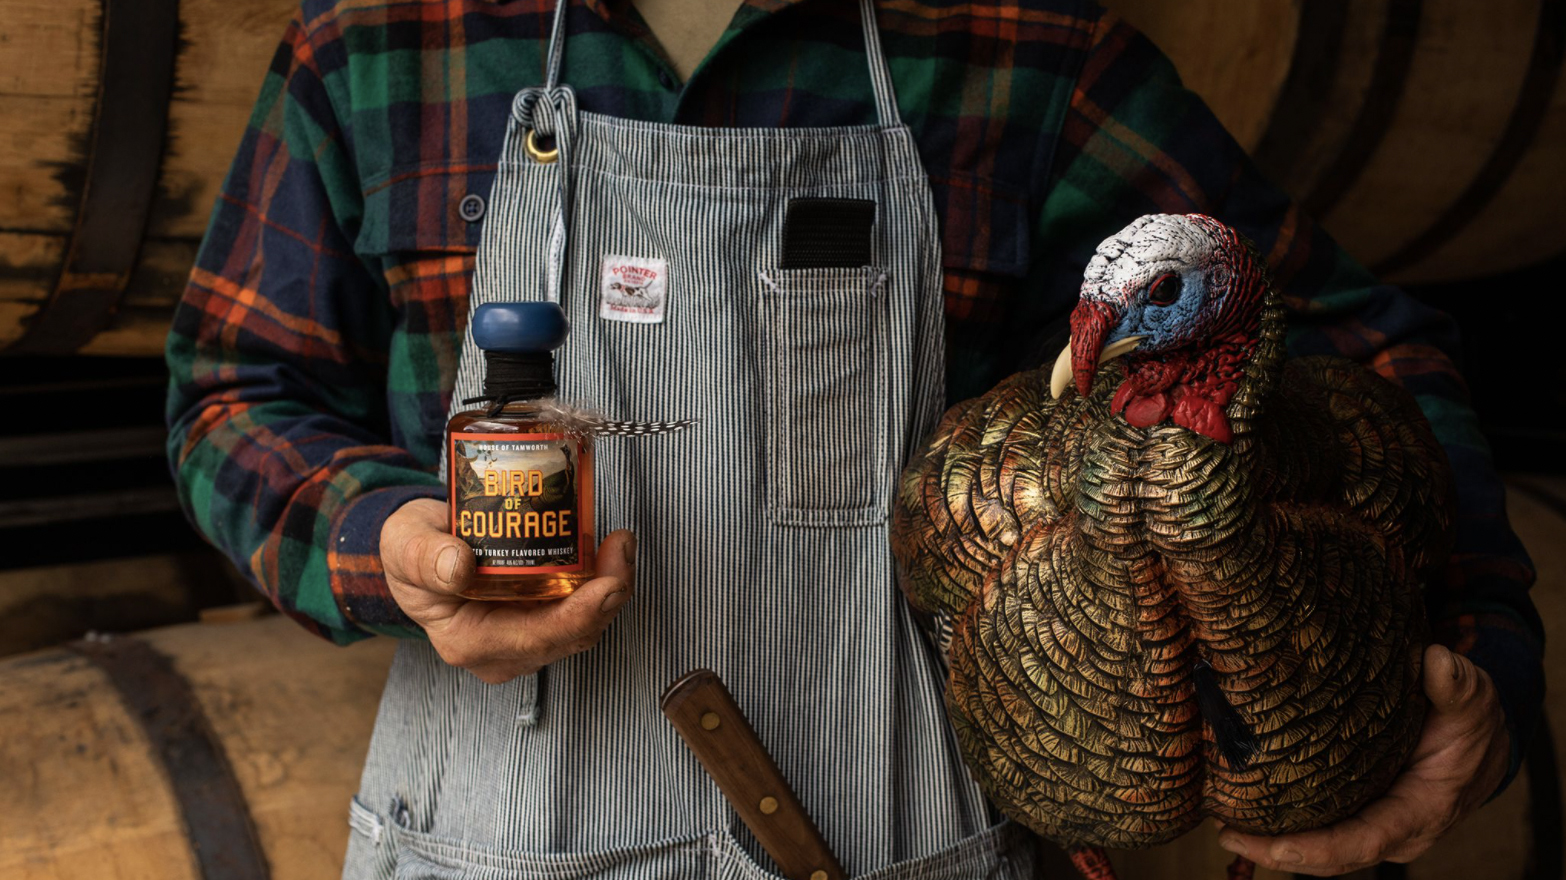 Tamworth Distilling Put An Entire Thanksgiving Dinner Into Its New Turkey Whiskey whiskey Bird of Courage